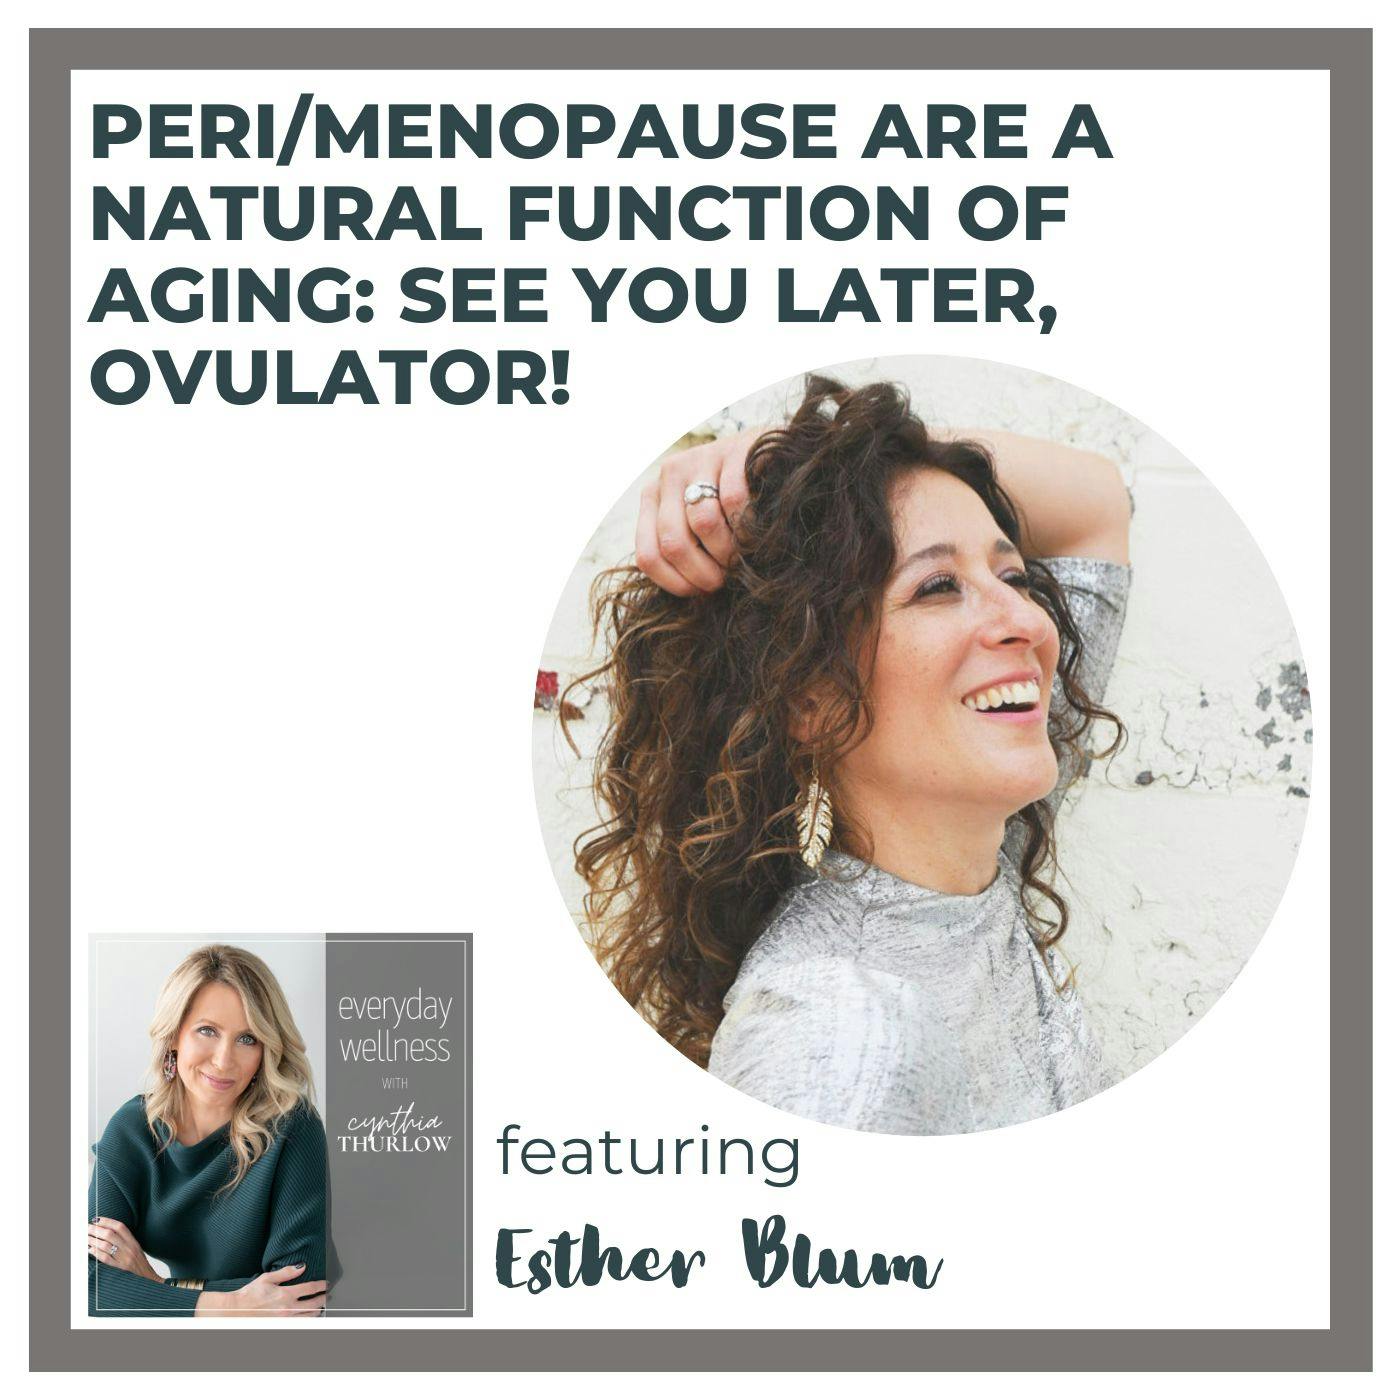 Ep. 264 Peri/Menopause are a Natural Function of Aging: See you later, Ovulator!